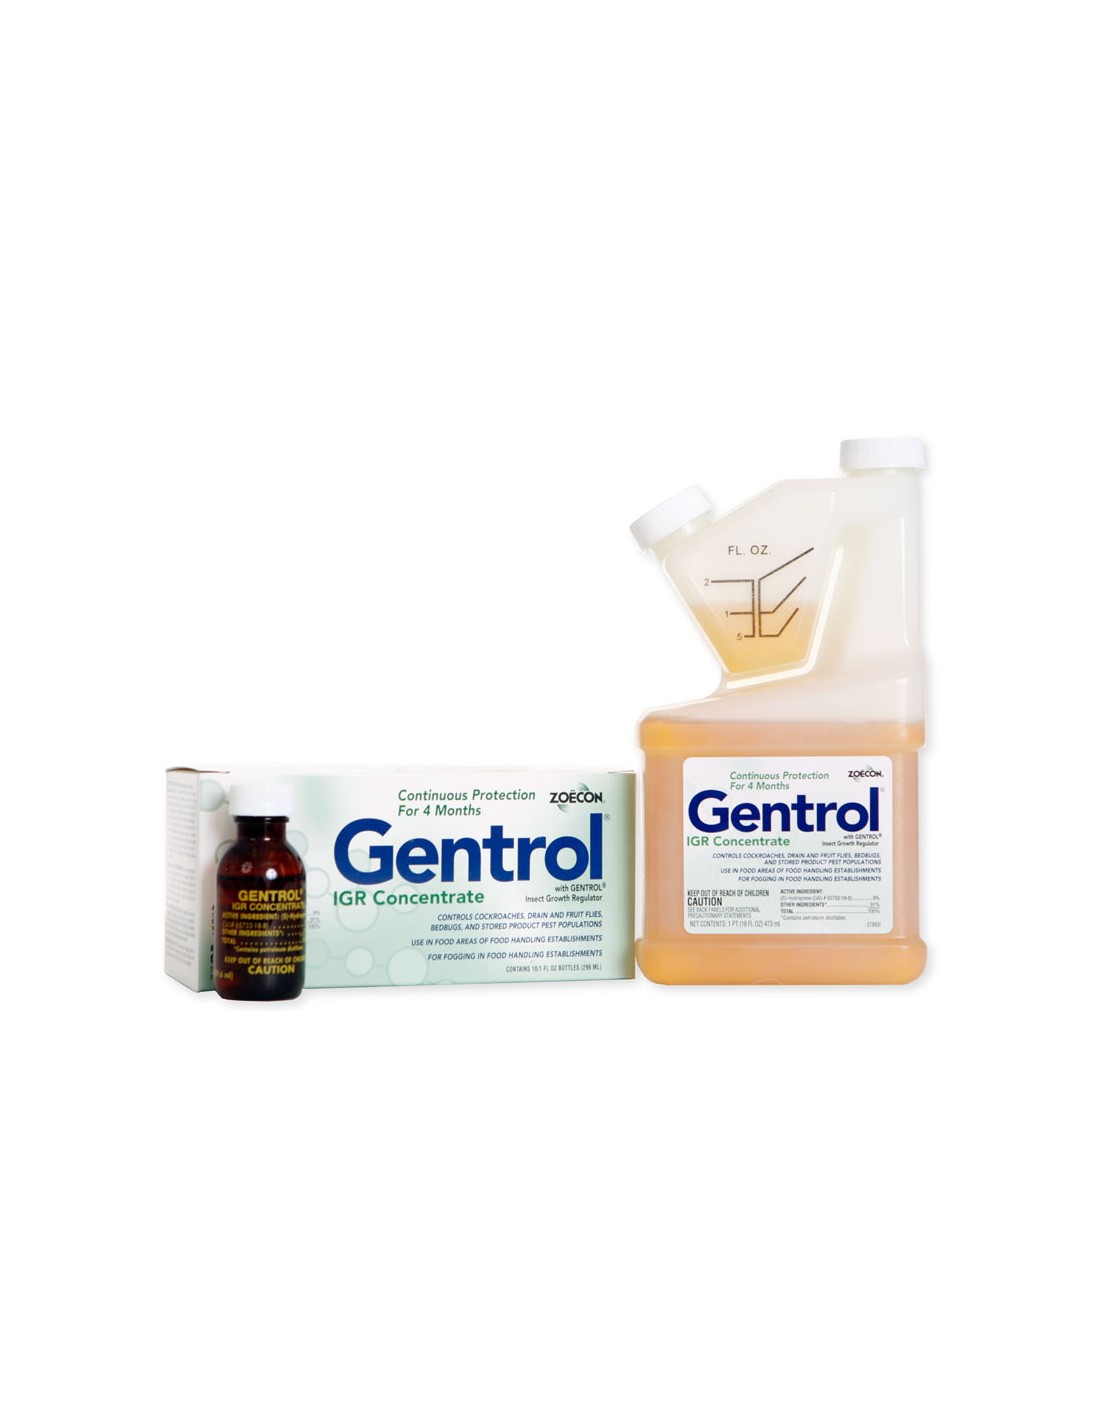 Can I mix the Gentrol with my Tengard and PBO-8.